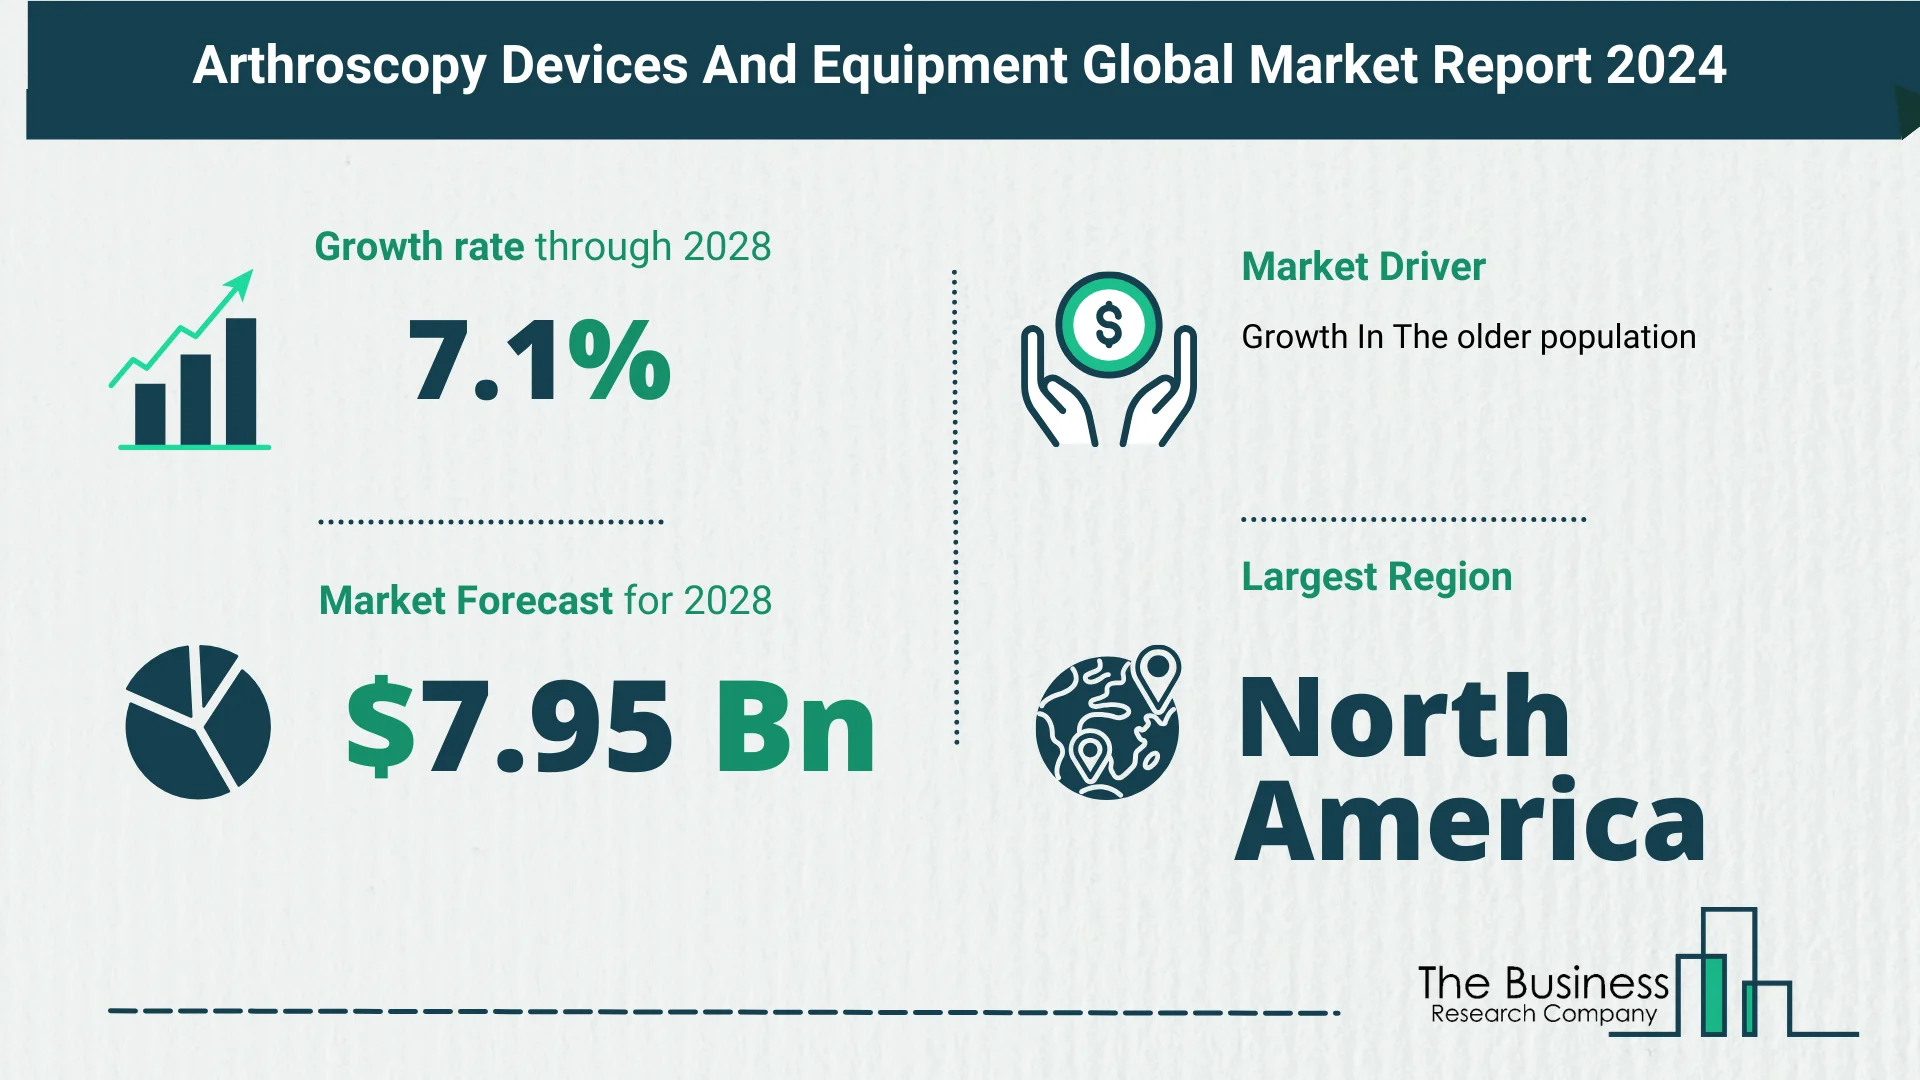 Key Insights On The Arthroscopy Devices And Equipment Market 2024 – Size, Driver, And Major Players | Arthrex Inc., Smith & Nephew PLC, ConMed Corporation, Stryker Corporation, Medtronic PLC